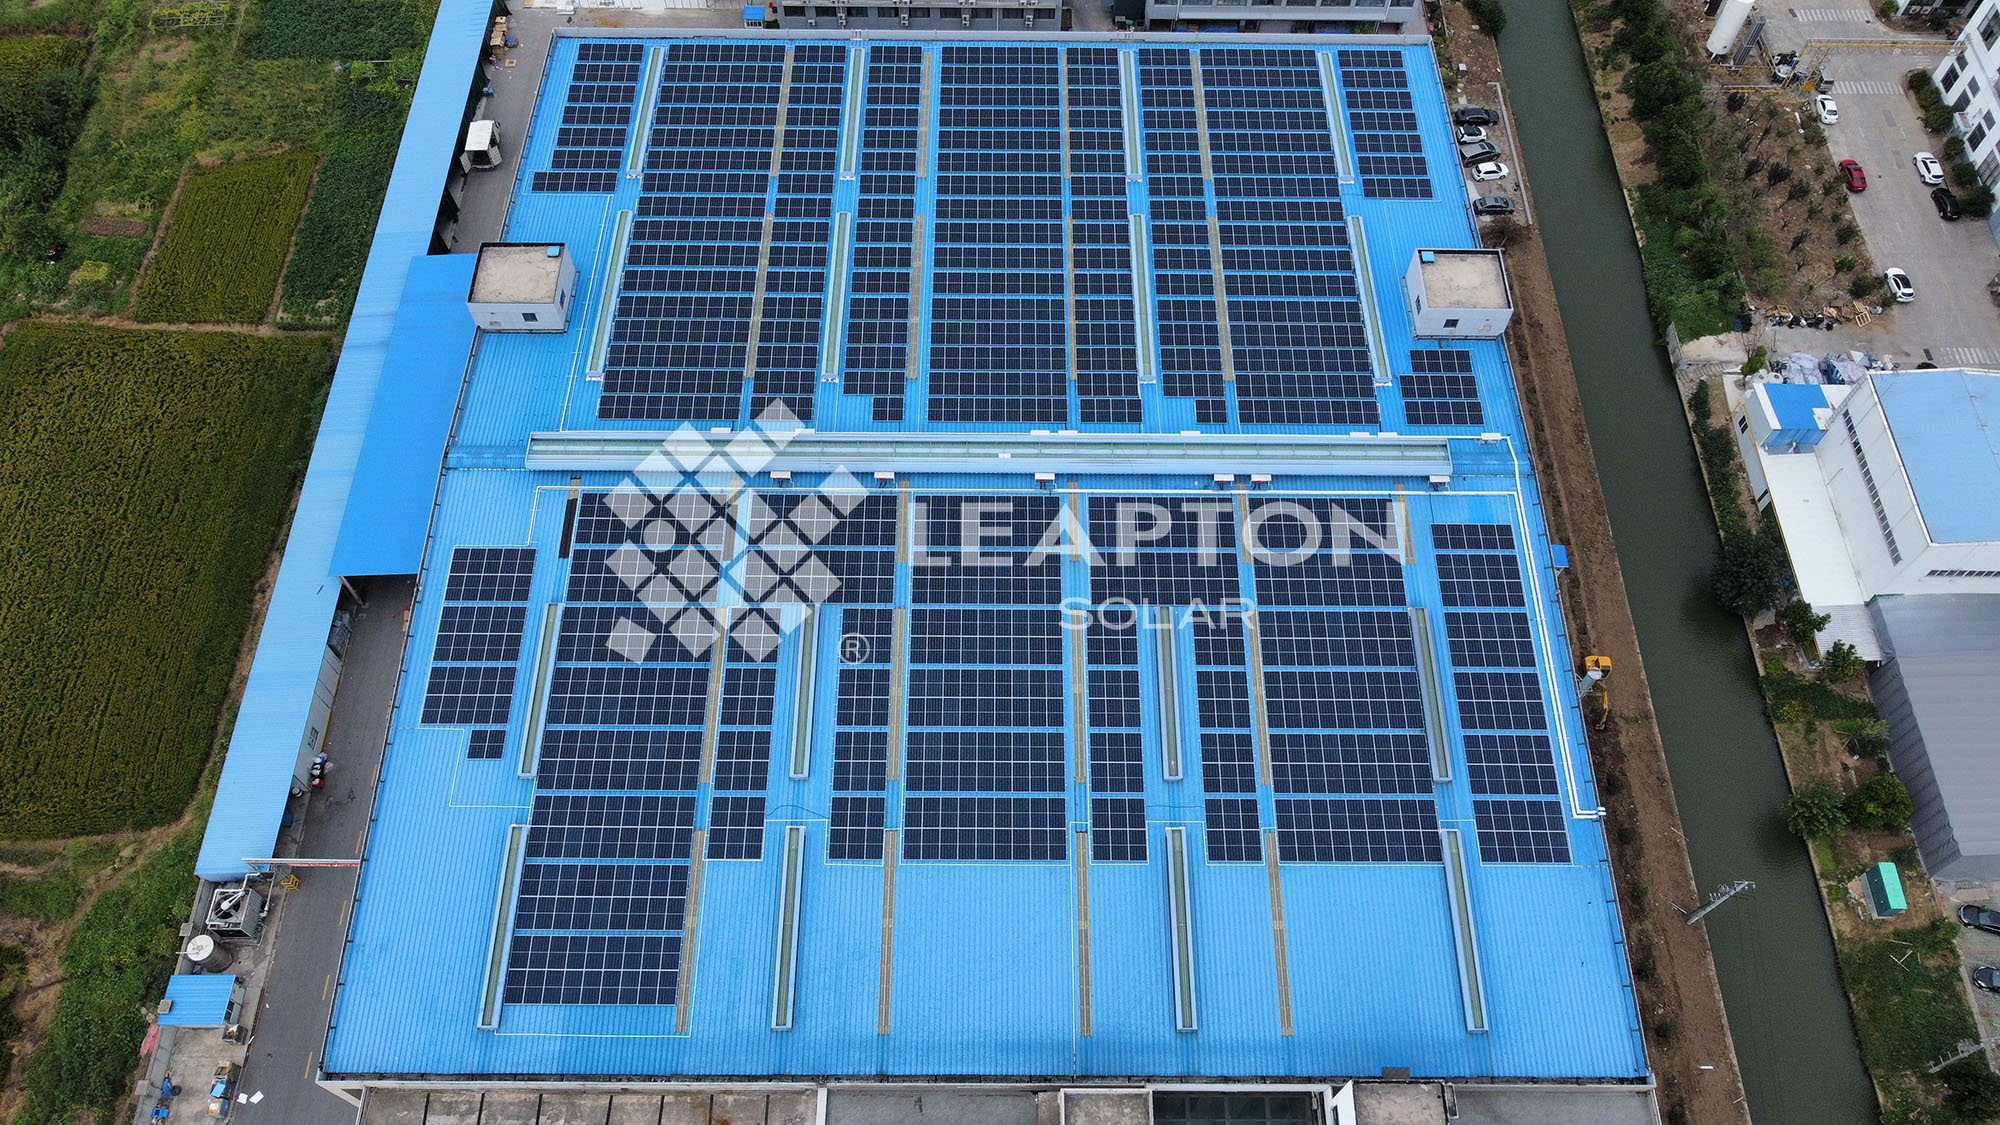 A new distributed solar system of Leapton Energy in China has completed